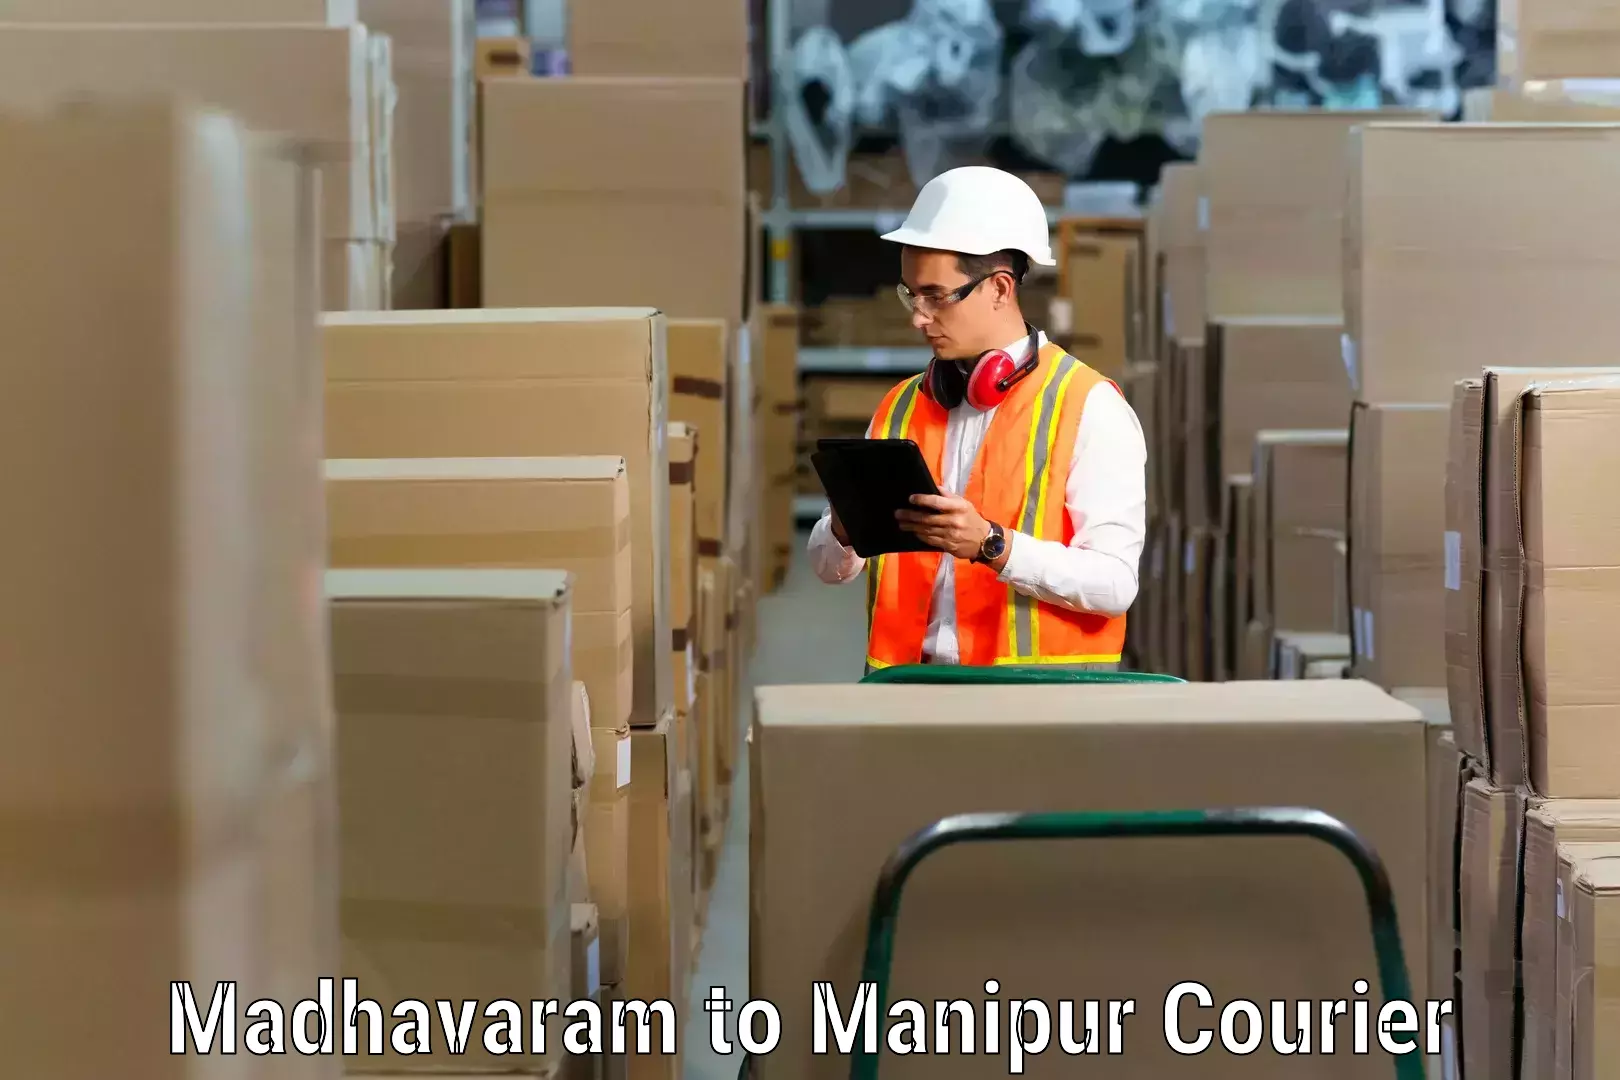 Furniture delivery service Madhavaram to Moirang